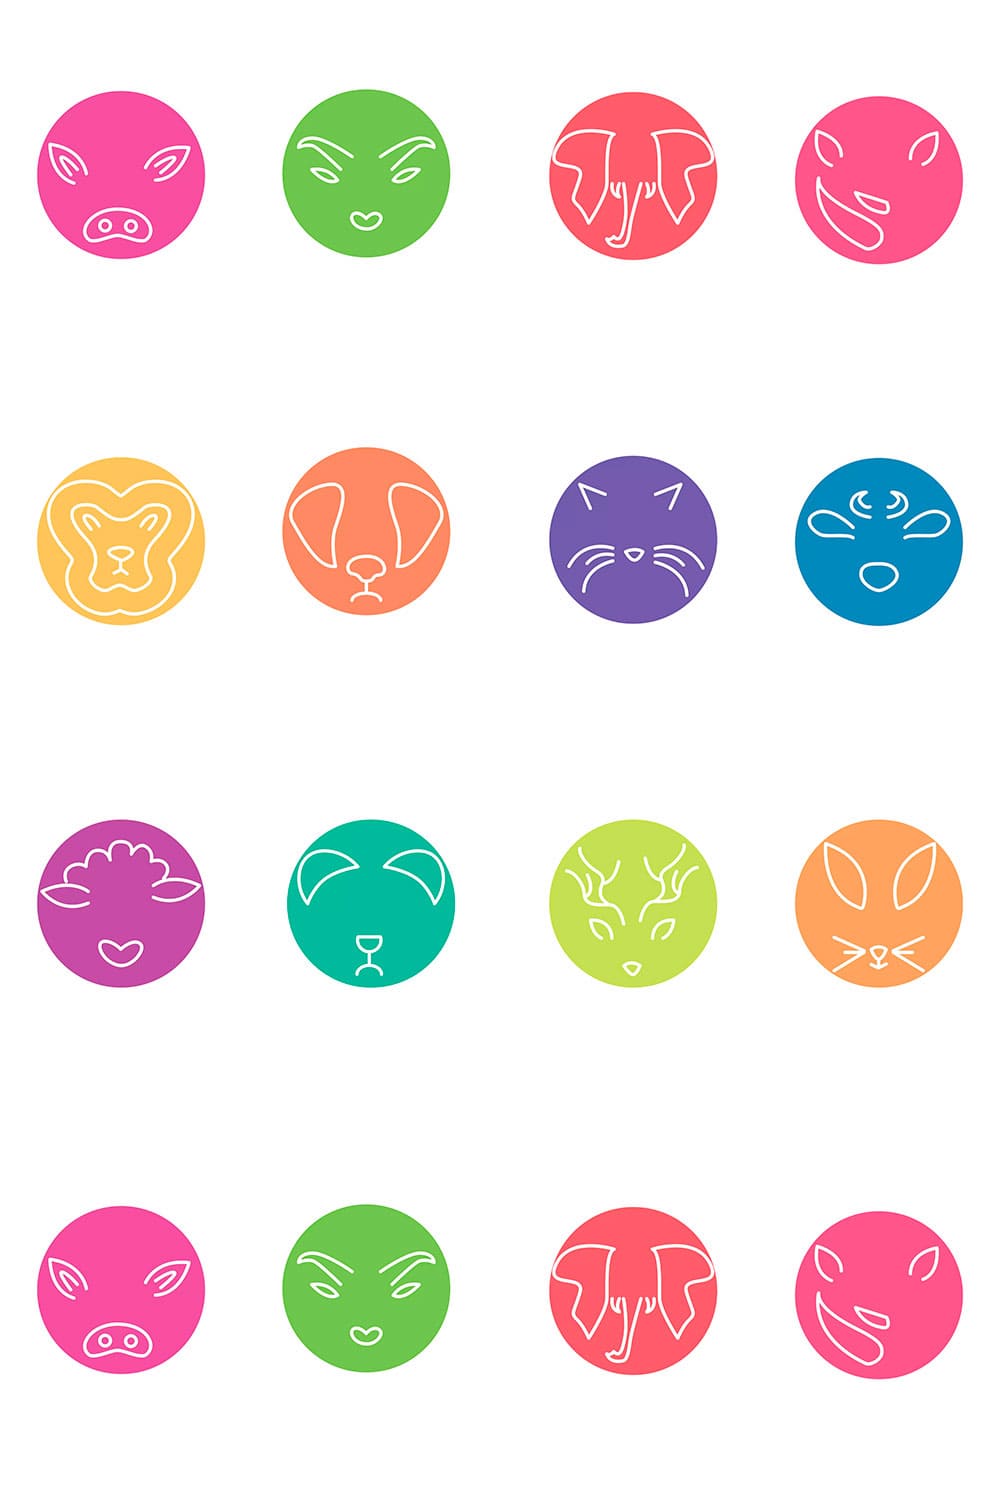 12 minimal rounded animals icons set, picture for pinterest.